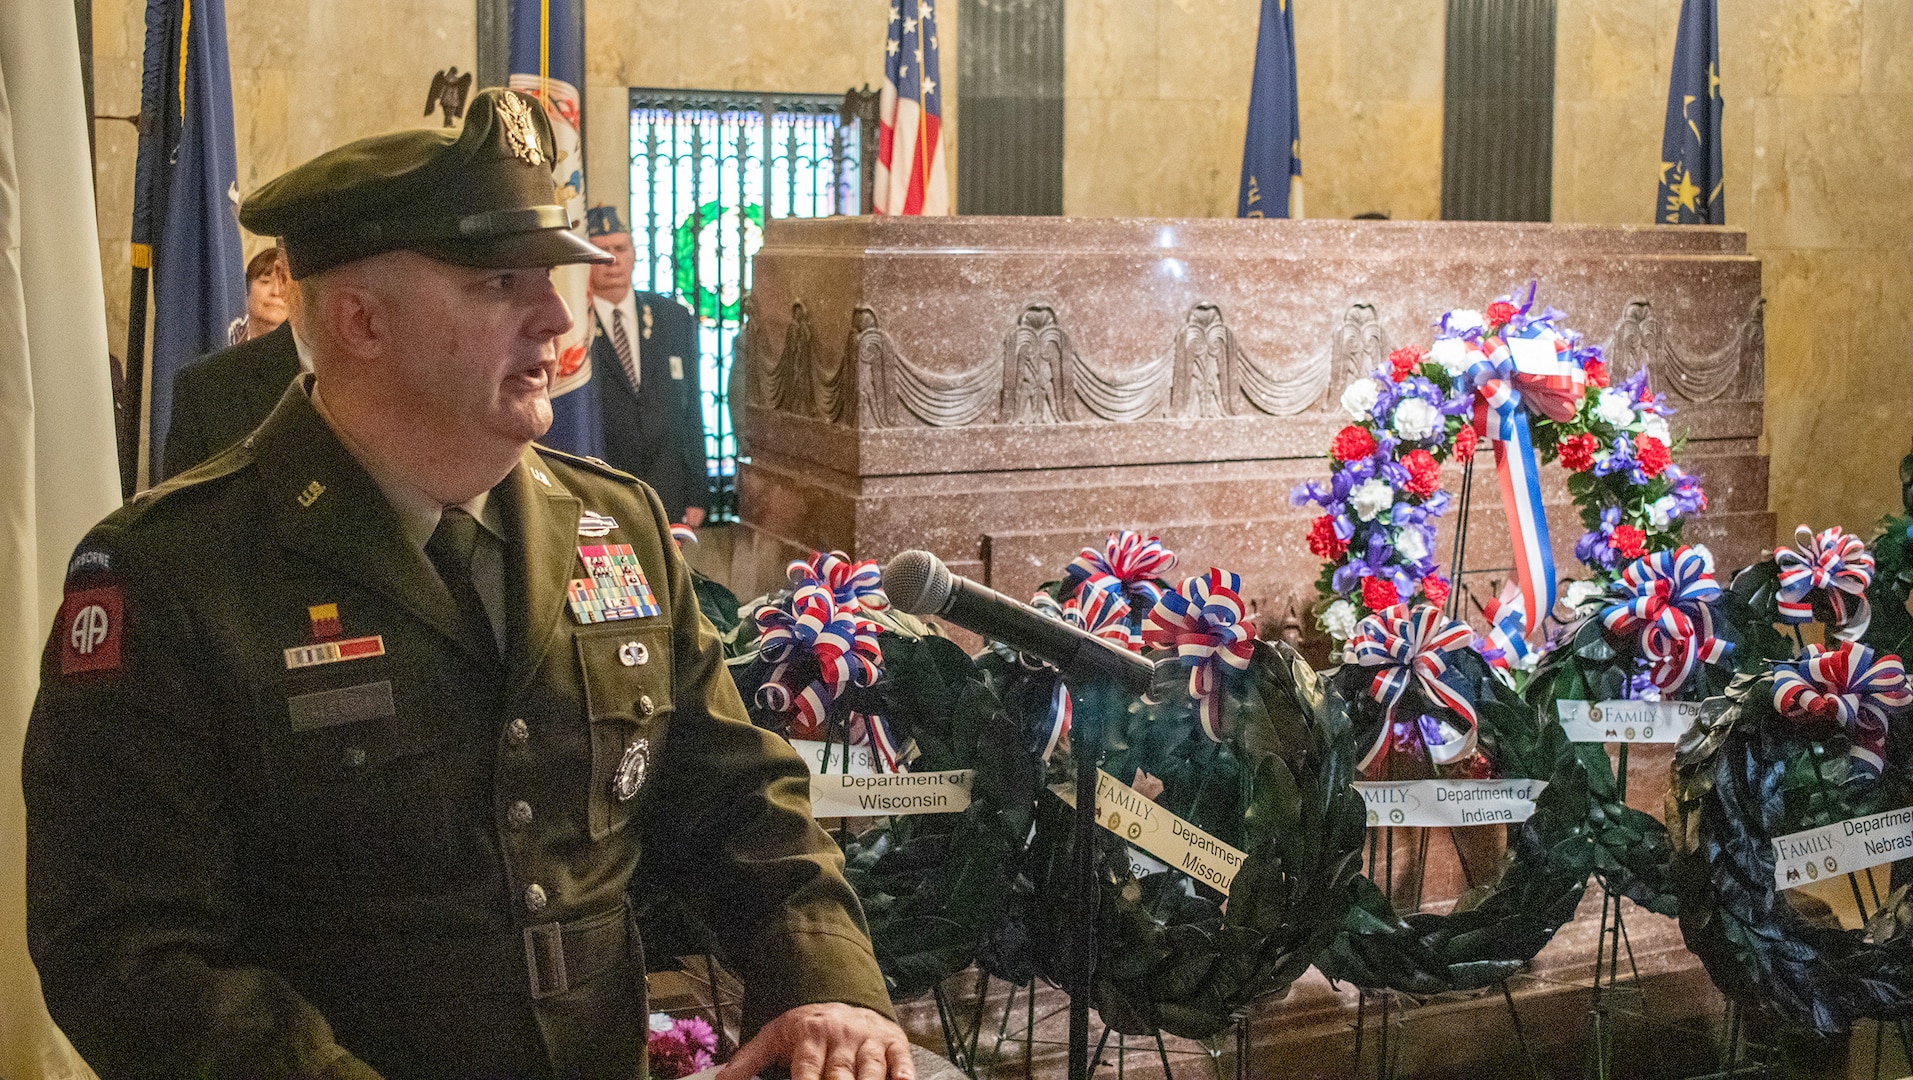 Brig. Gen. Mark Alessia delivers remarks at the tomb of President Abraham Lincoln Feb. 12, 2024, at Oak Ridge Cemetery in Springfield, Illinois, after placing a wreath at Lincoln’s Tomb on the 215th anniversary of birth.